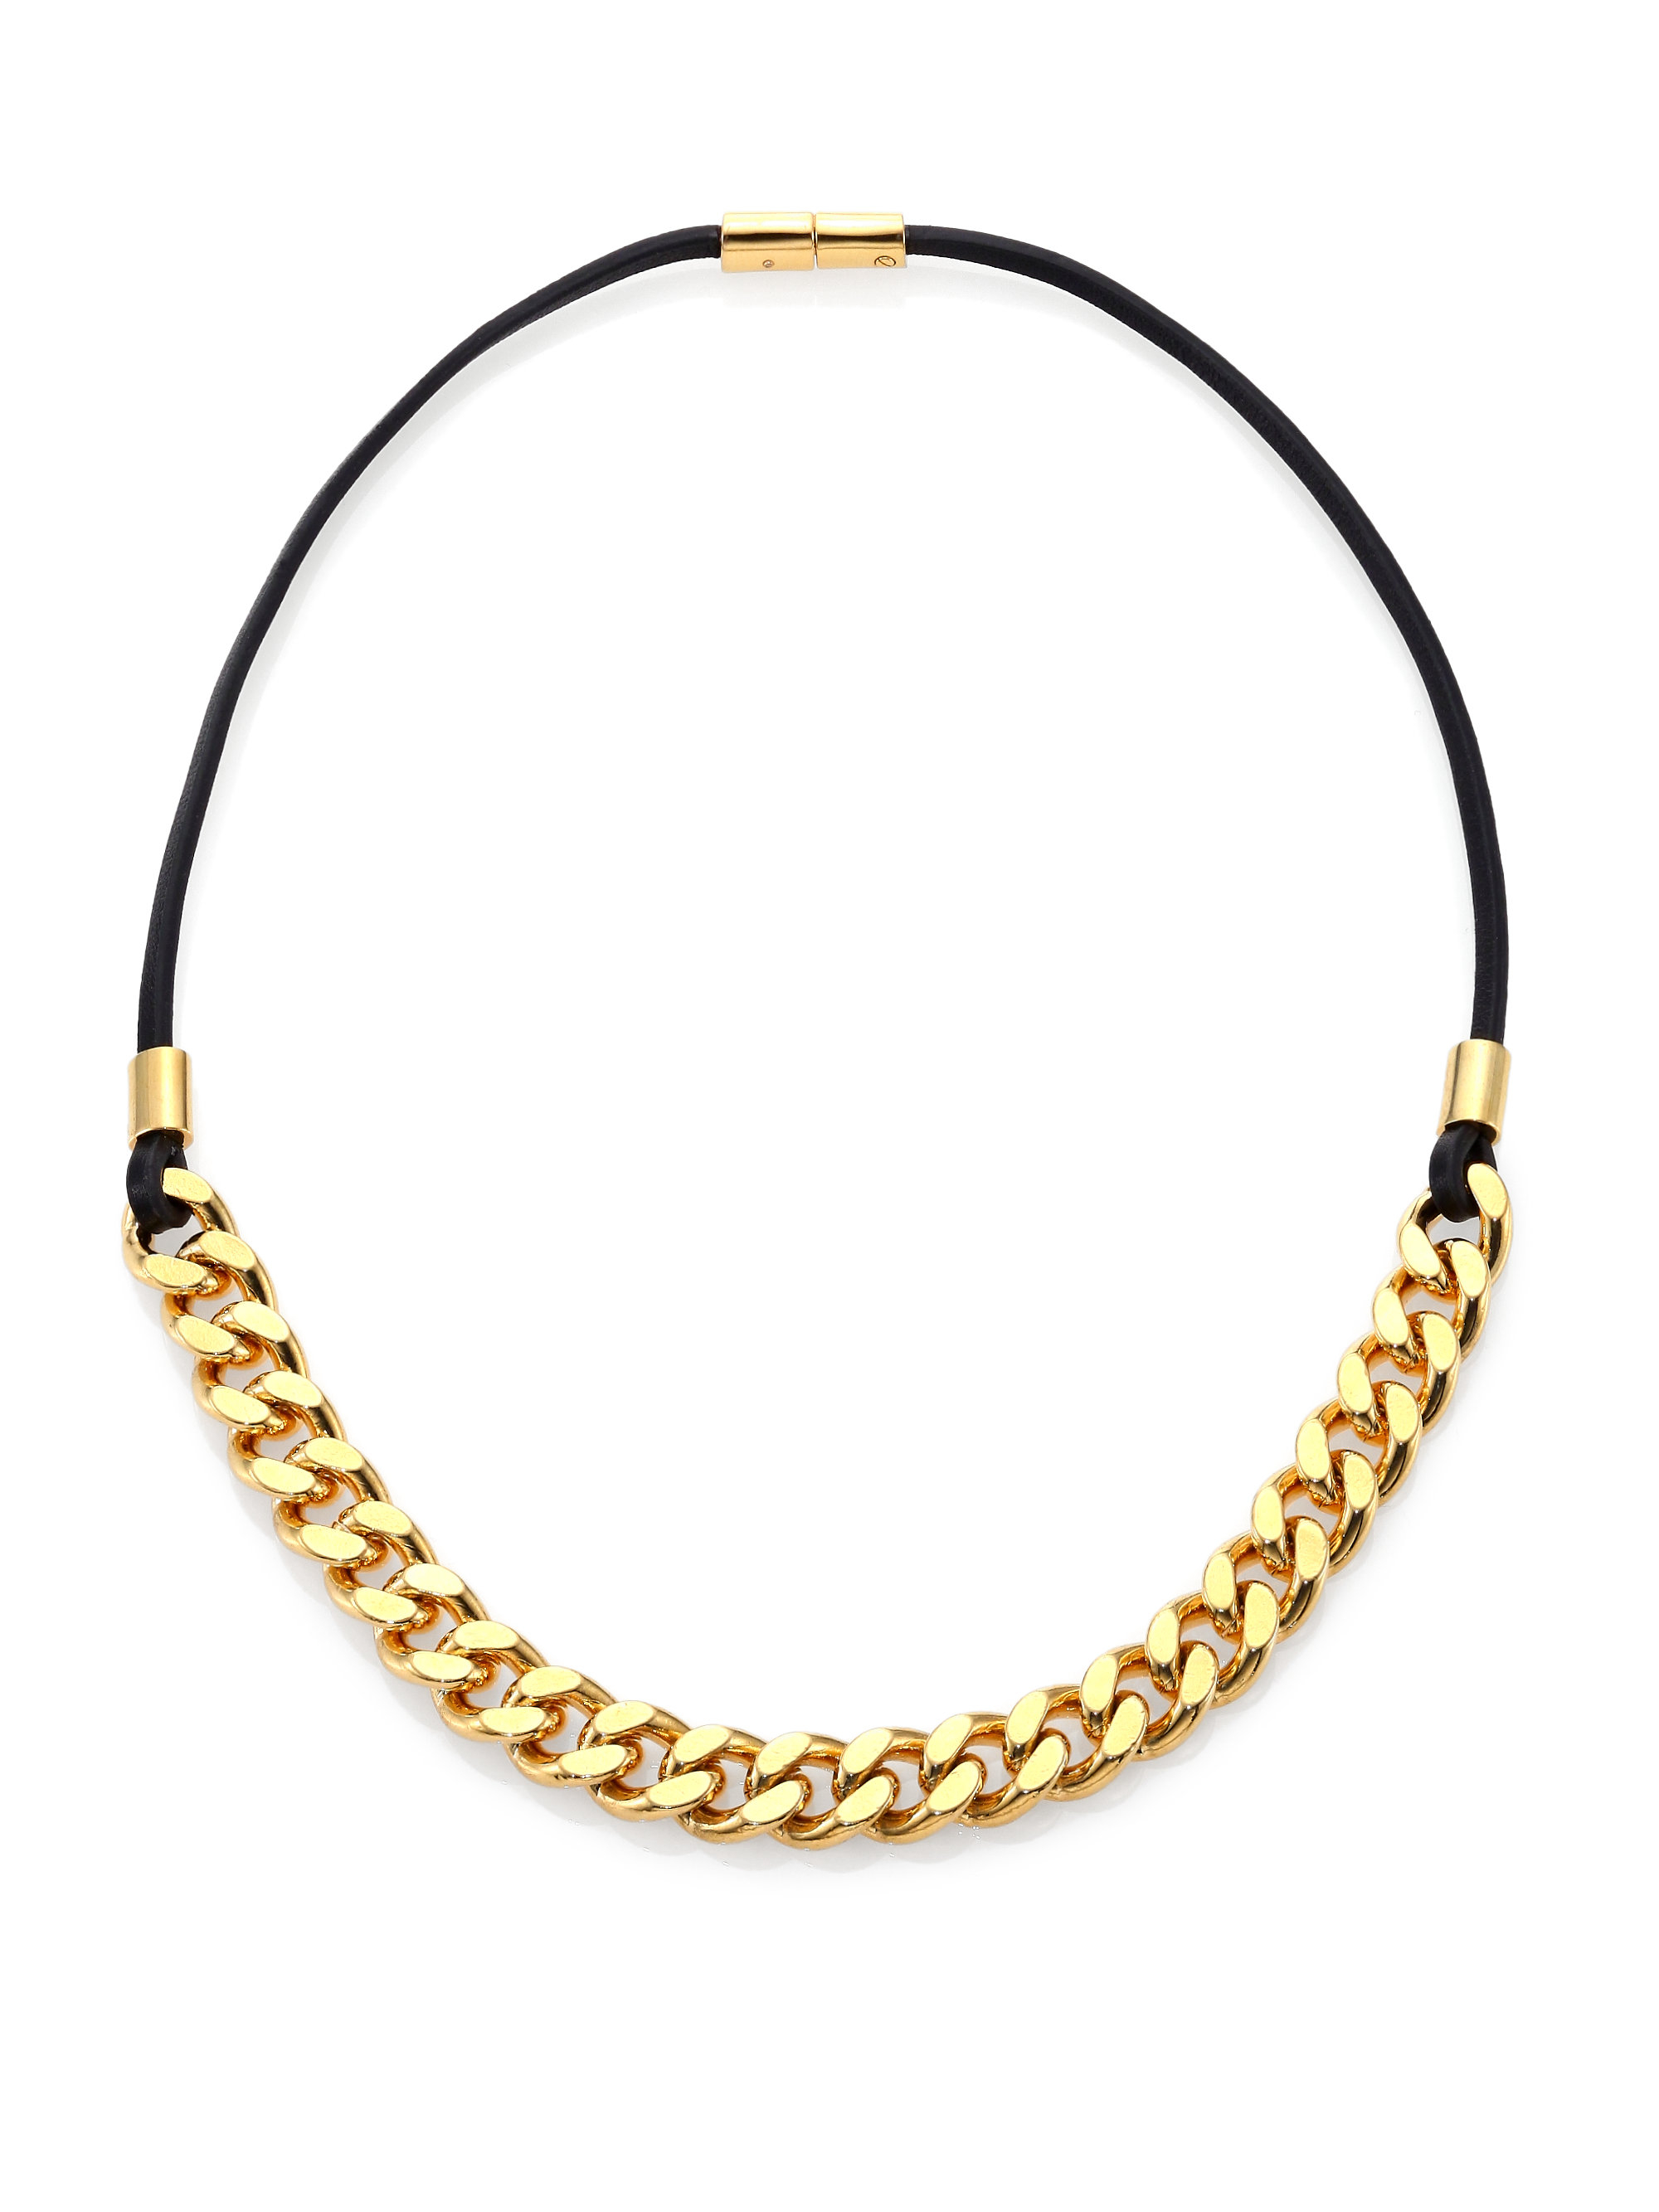 Michael kors Leather & Chain Necklace in Metallic | Lyst